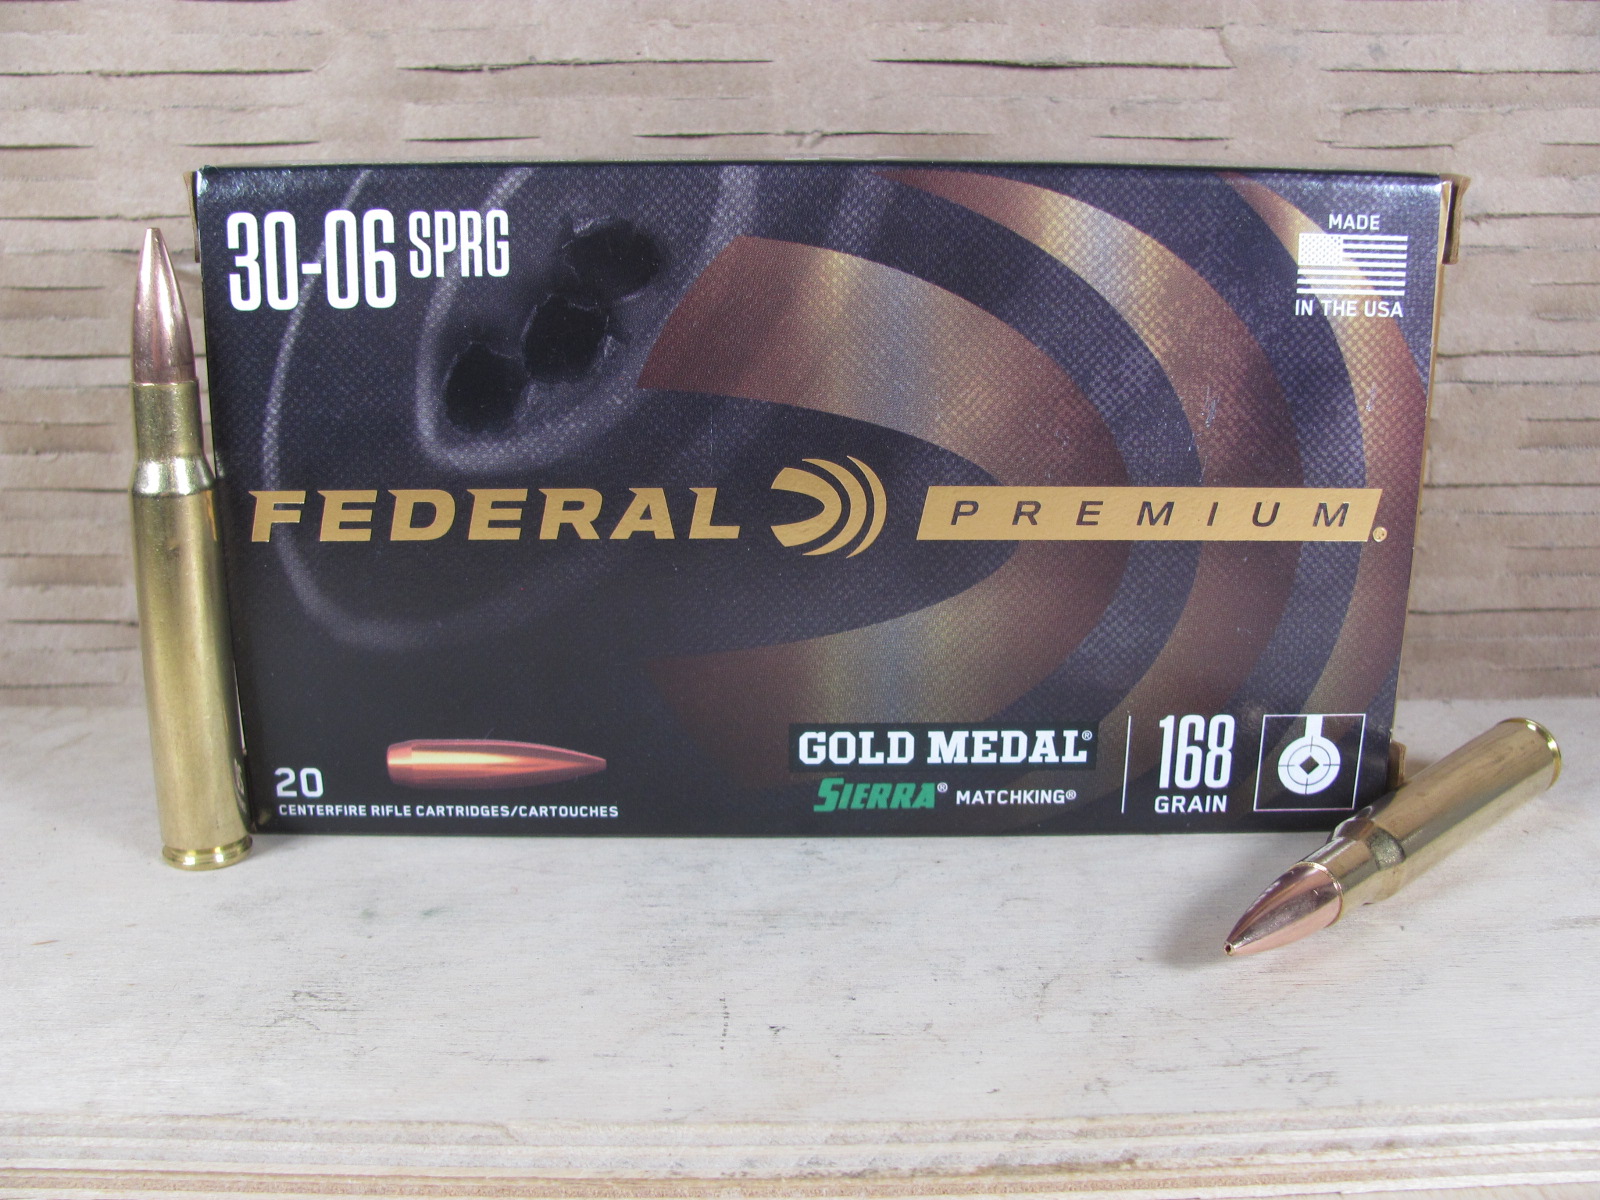 20 Round Box - 30-06 Springfield Federal Gold Medal Match 168 